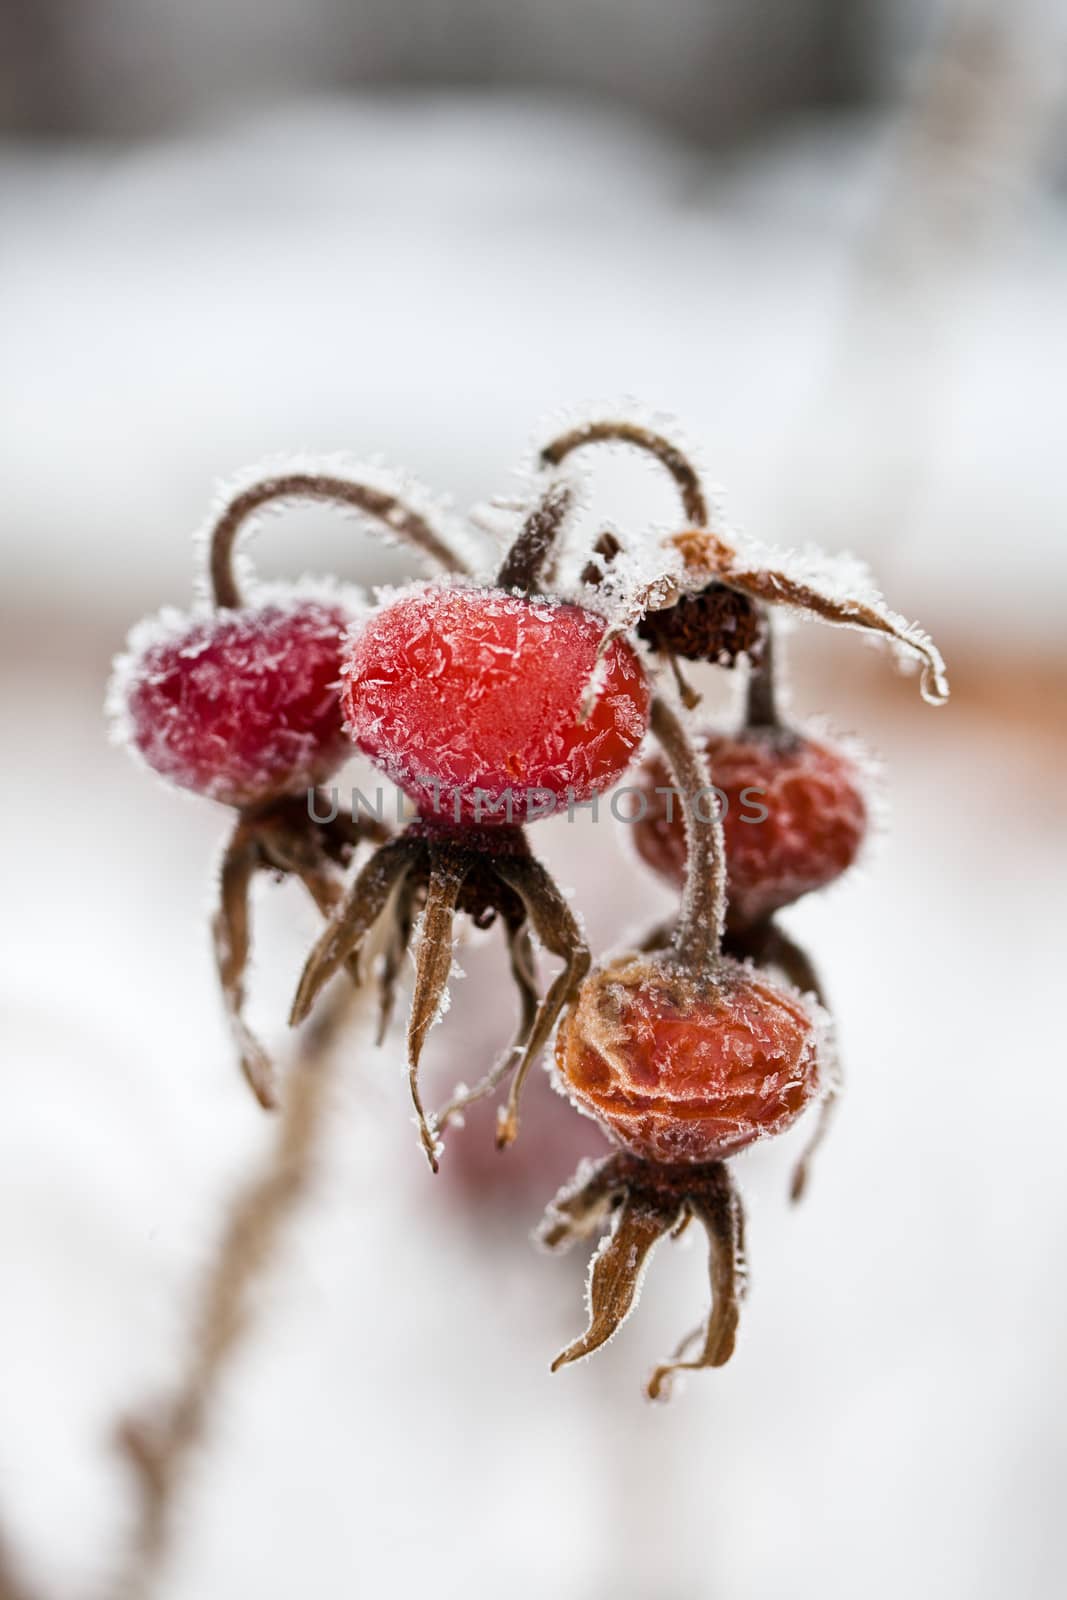 Frozen wild rose hips by vicdemid